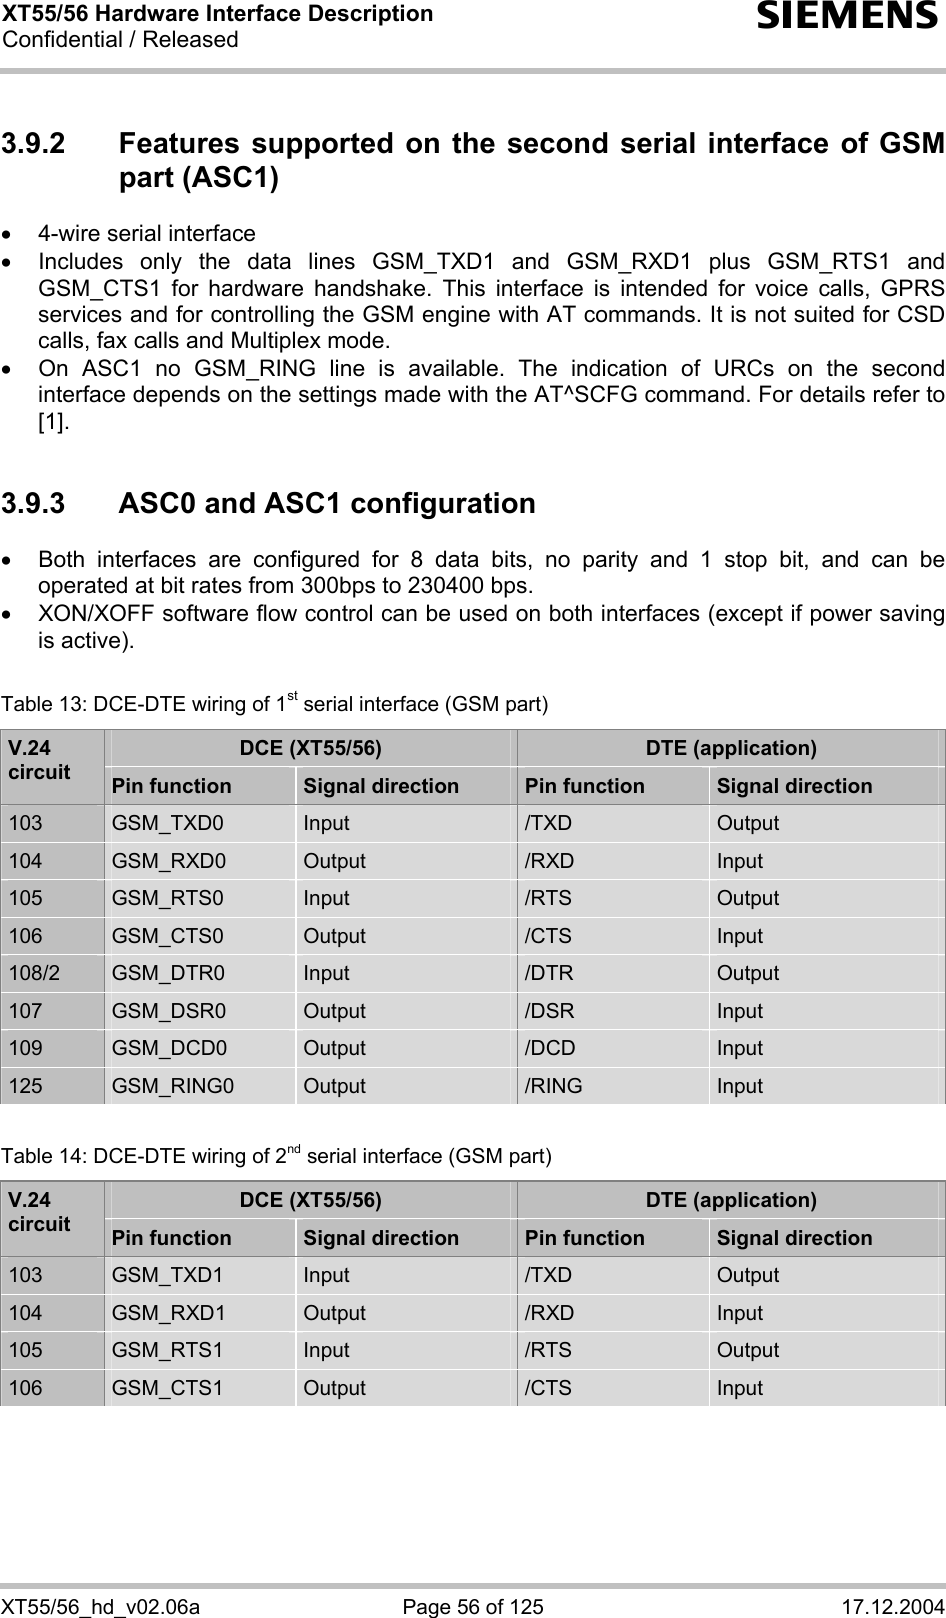 XT55/56 Hardware Interface Description Confidential / Released s XT55/56_hd_v02.06a  Page 56 of 125  17.12.2004 3.9.2  Features supported on the second serial interface of GSM part (ASC1) •  4-wire serial interface •  Includes only the data lines GSM_TXD1 and GSM_RXD1 plus GSM_RTS1 and GSM_CTS1 for hardware handshake. This interface is intended for voice calls, GPRS services and for controlling the GSM engine with AT commands. It is not suited for CSD calls, fax calls and Multiplex mode.  •  On ASC1 no GSM_RING line is available. The indication of URCs on the second interface depends on the settings made with the AT^SCFG command. For details refer to [1].  3.9.3  ASC0 and ASC1 configuration •  Both interfaces are configured for 8 data bits, no parity and 1 stop bit, and can be operated at bit rates from 300bps to 230400 bps.  •  XON/XOFF software flow control can be used on both interfaces (except if power saving is active).  Table 13: DCE-DTE wiring of 1st serial interface (GSM part) DCE (XT55/56)  DTE (application) V.24 circuit  Pin function  Signal direction  Pin function  Signal direction 103  GSM_TXD0  Input  /TXD  Output 104  GSM_RXD0  Output  /RXD  Input 105  GSM_RTS0  Input  /RTS  Output 106  GSM_CTS0  Output  /CTS  Input 108/2  GSM_DTR0  Input  /DTR  Output 107  GSM_DSR0  Output  /DSR  Input 109  GSM_DCD0  Output  /DCD  Input 125  GSM_RING0  Output  /RING  Input  Table 14: DCE-DTE wiring of 2nd serial interface (GSM part) DCE (XT55/56)  DTE (application) V.24 circuit  Pin function  Signal direction  Pin function  Signal direction 103  GSM_TXD1  Input  /TXD  Output 104  GSM_RXD1  Output  /RXD  Input 105  GSM_RTS1  Input  /RTS  Output 106  GSM_CTS1  Output  /CTS  Input    